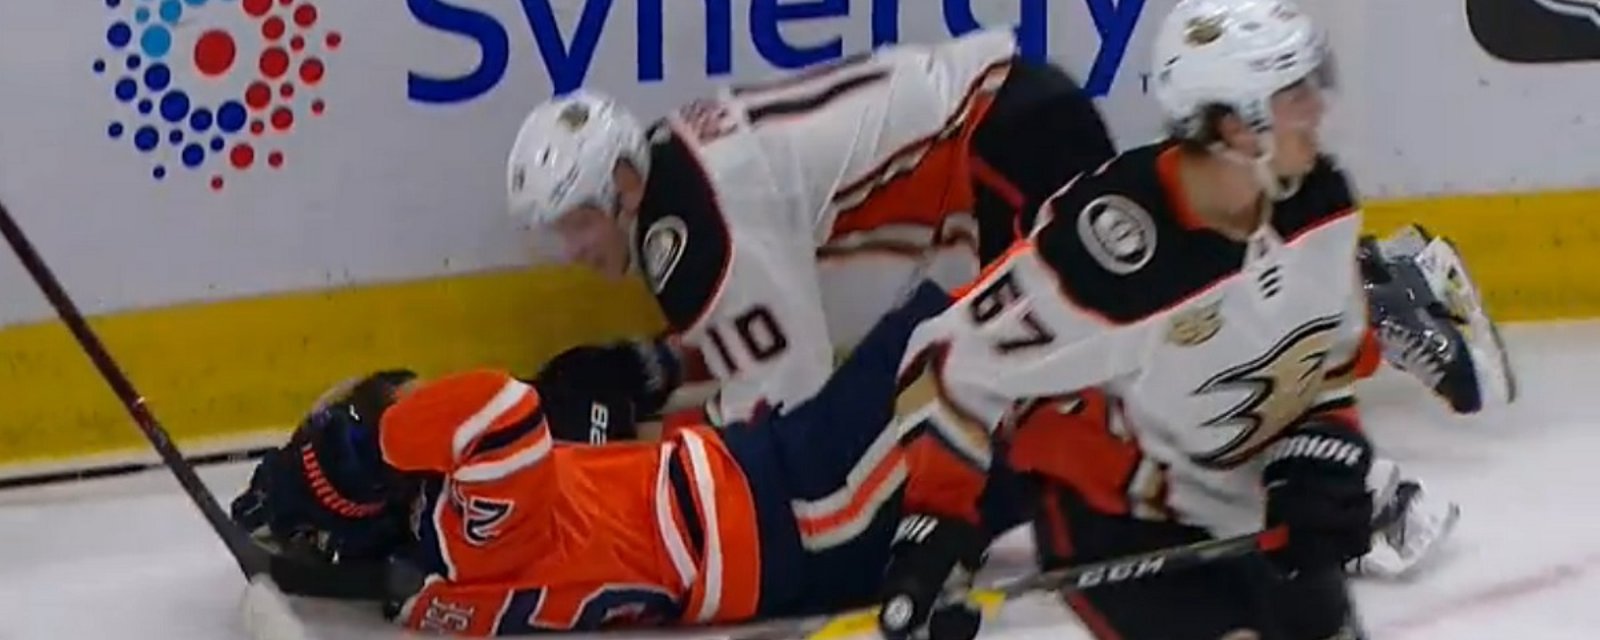 Perry drills a defenseless Nurse with a forearm to the head in the final seconds of the game.